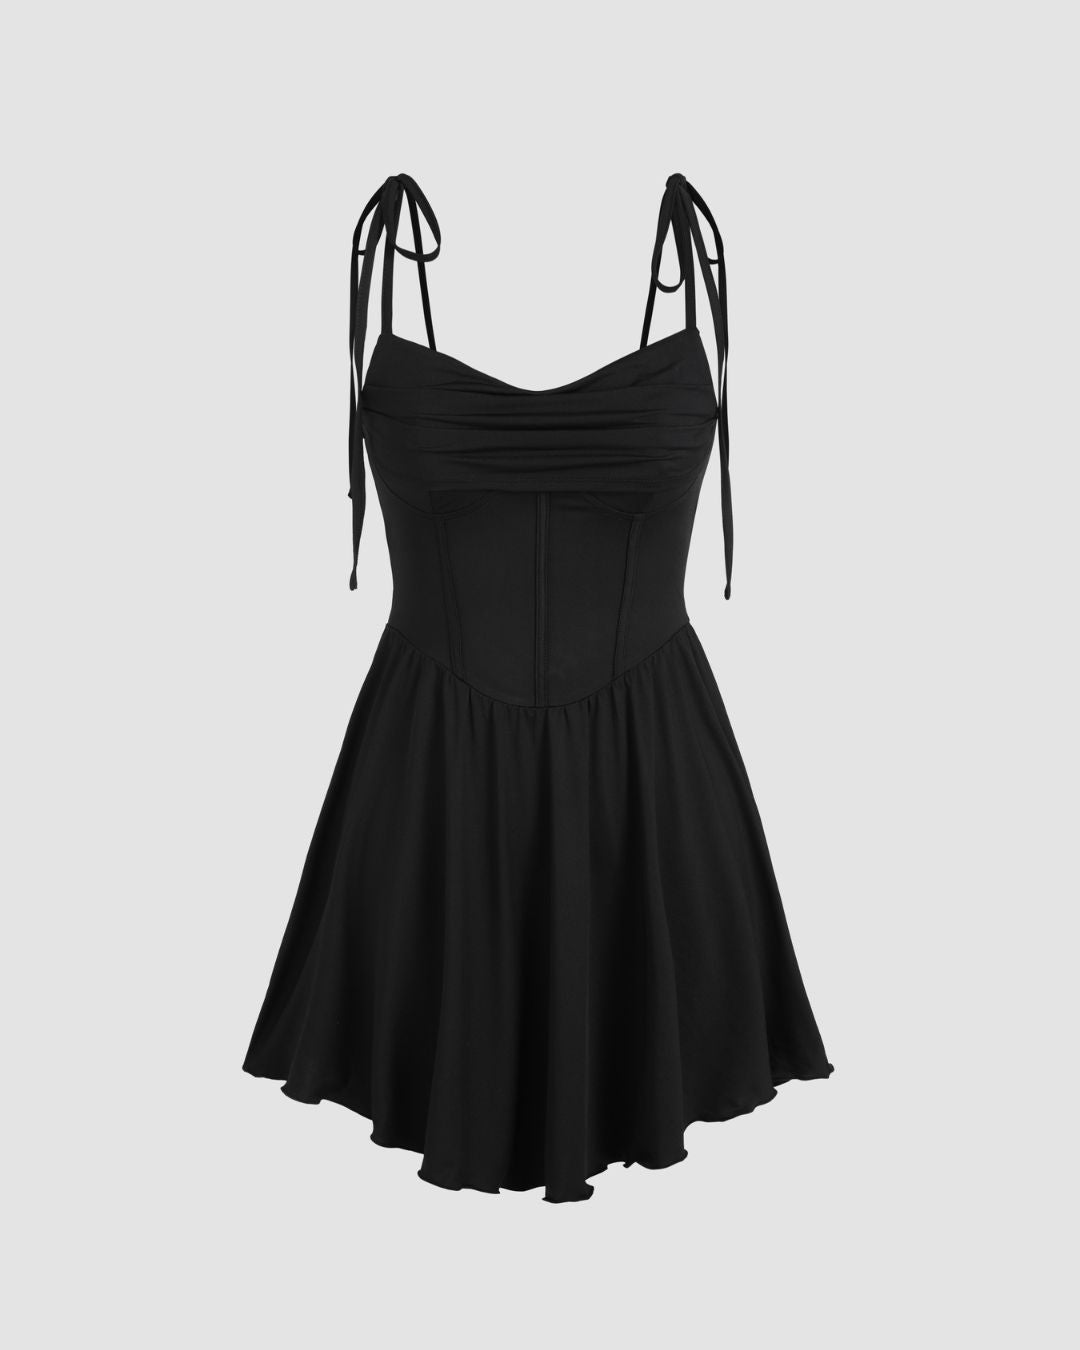 GATHERED FIT AND FLARE DRESS,black, dresses, fit and flare, gathered, glam, knitted, mini, party, ribbed, sleeveless, solid, spaghetti strap, stretchable, tailored fit,gathered-fit-and-flare-dress-black,Color- Black
Fabric- Ribbed
Type- Fit And Flare
Fit- Tailored Fit
Length- Mini
Sleeve- Sleeveless 
Strap- Spaghetti Strap 
Print- Solid
Details- Gathers at waist and corset bodice